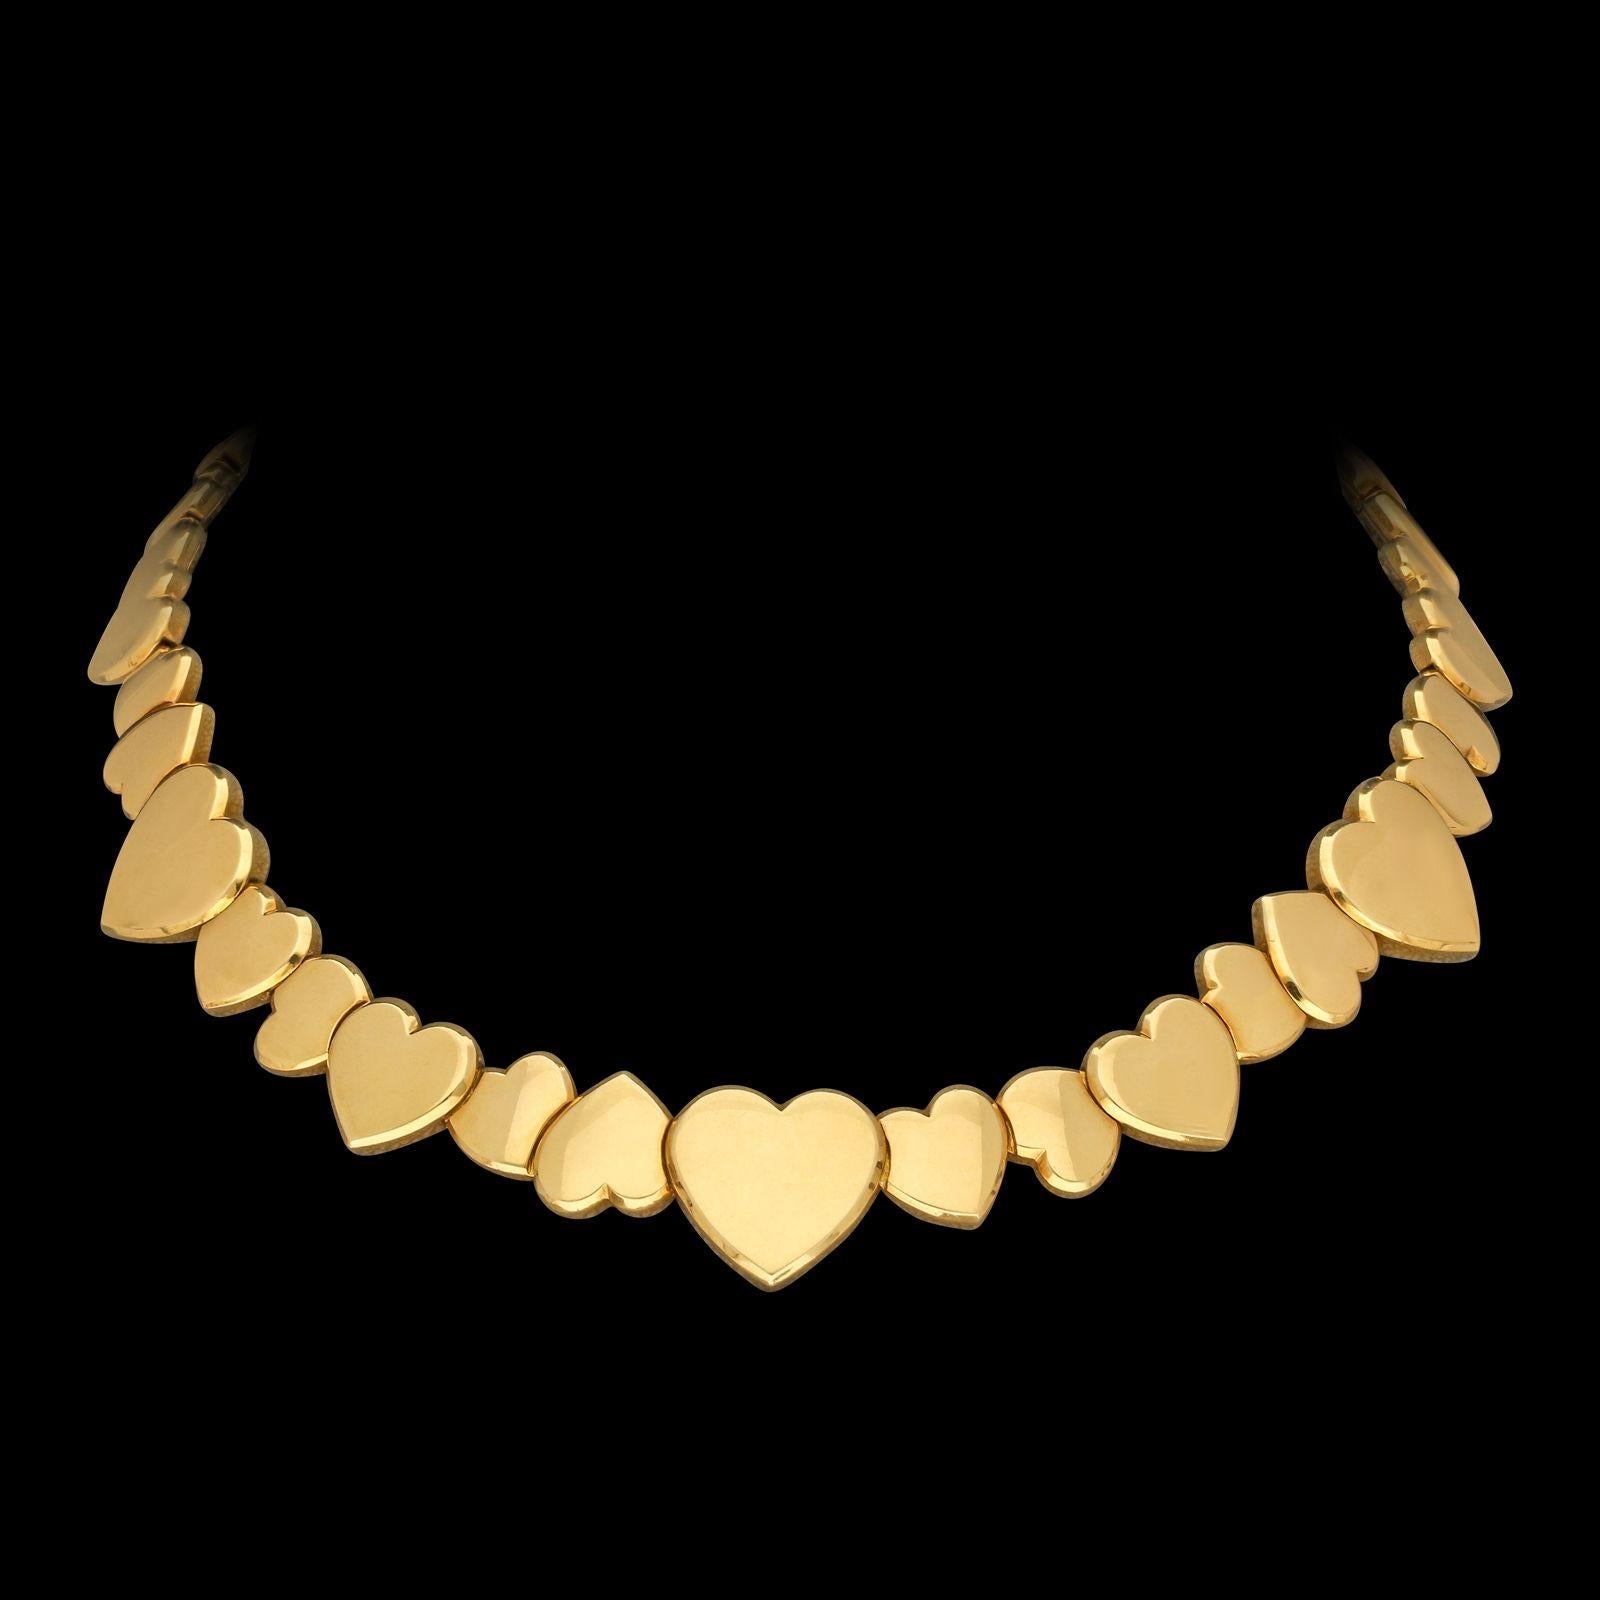 A stylish gold necklace by Fred Paris c.1980s, designed as a continuous row of overlapping chunky heart motifs of varying sizes, some pointing up and others down, the six largest hearts are symmetrical in shape and spaced evenly around the necklace